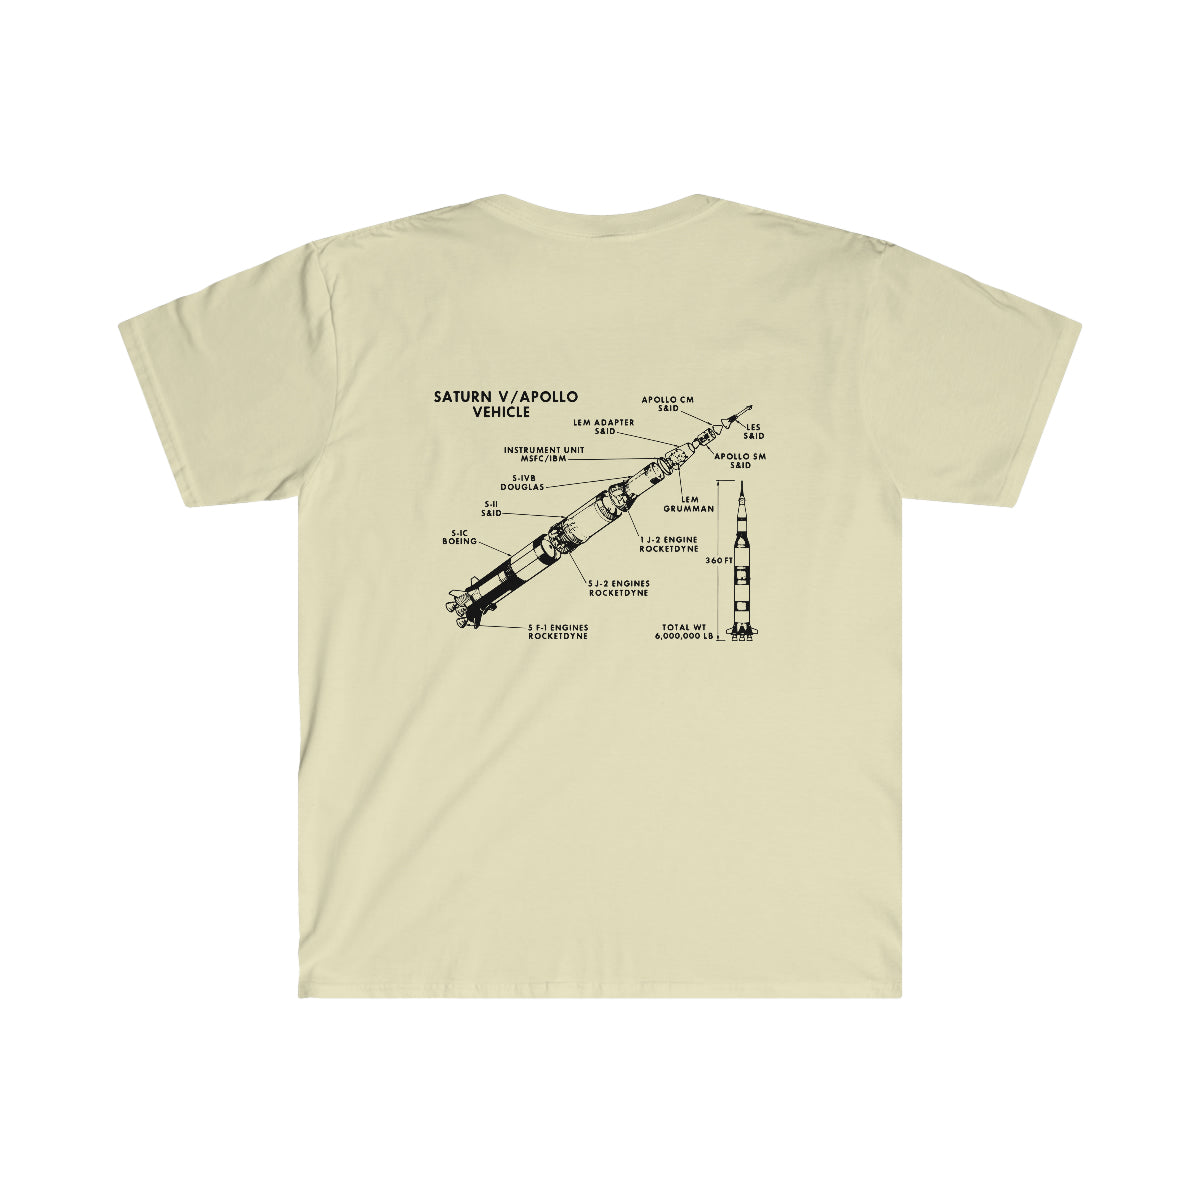 A Saturn / Apollo Vehicle-themed t-shirt featuring a diagram of a rocket, perfect for space exploration enthusiasts.